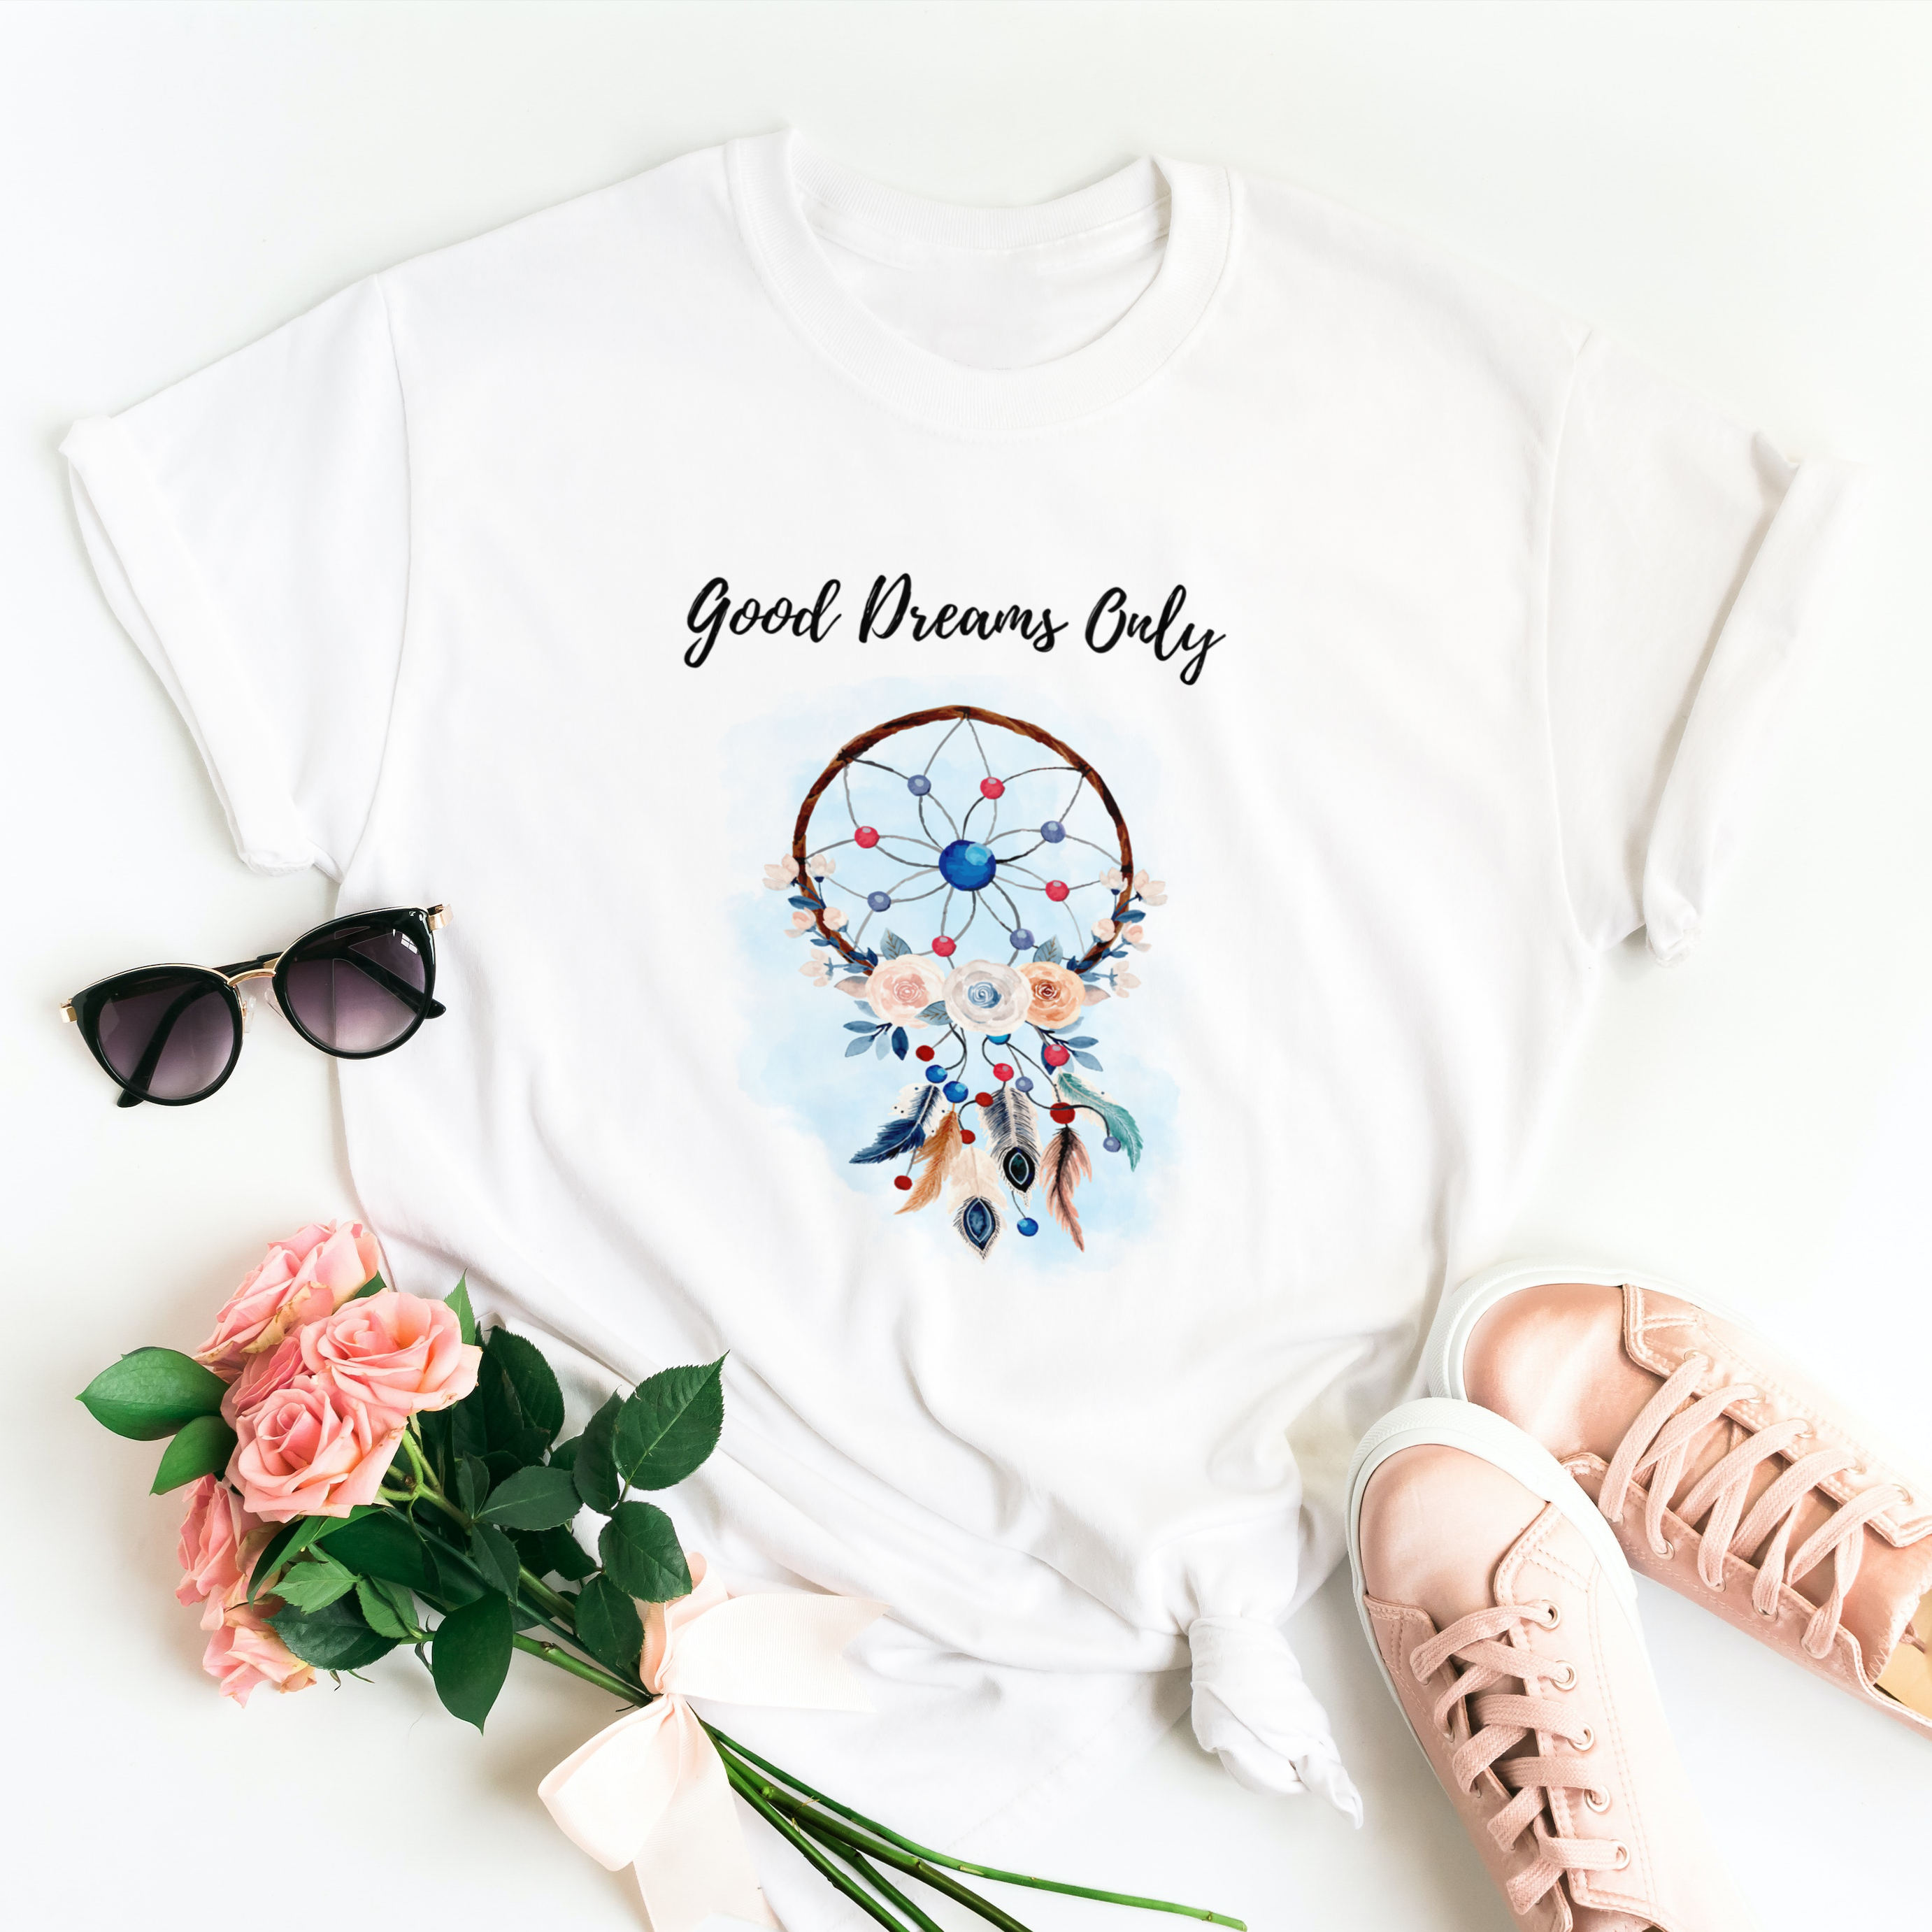 Story of Awakening Lifestyle Community Spirituality Relationships Love Light Meditation Oneness Earth Balance Healing Shop Store Charity Tree Nature Read Write T shirt Tops Tees Clothing Women Horoscope Organic Good Dreams Only Dream Catcher Quote